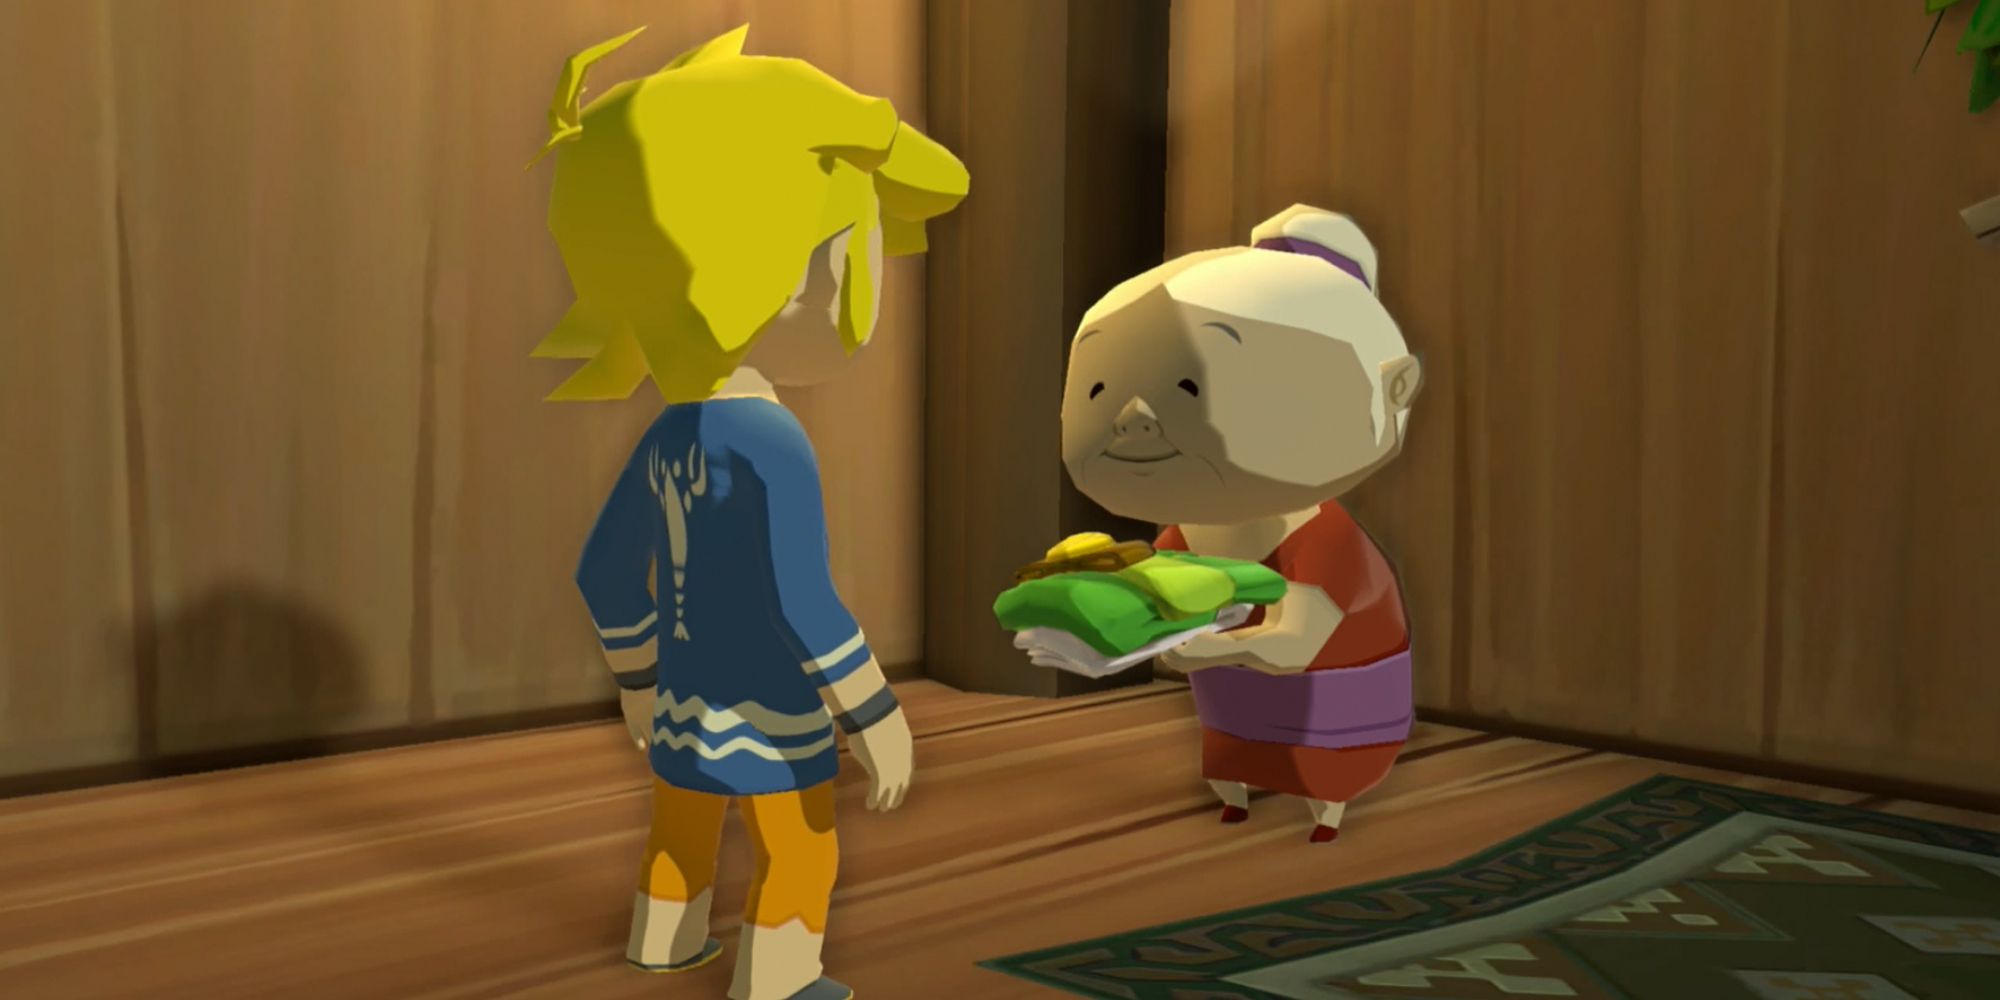 Link's grandmother giving him his green outfit in The Wind Waker